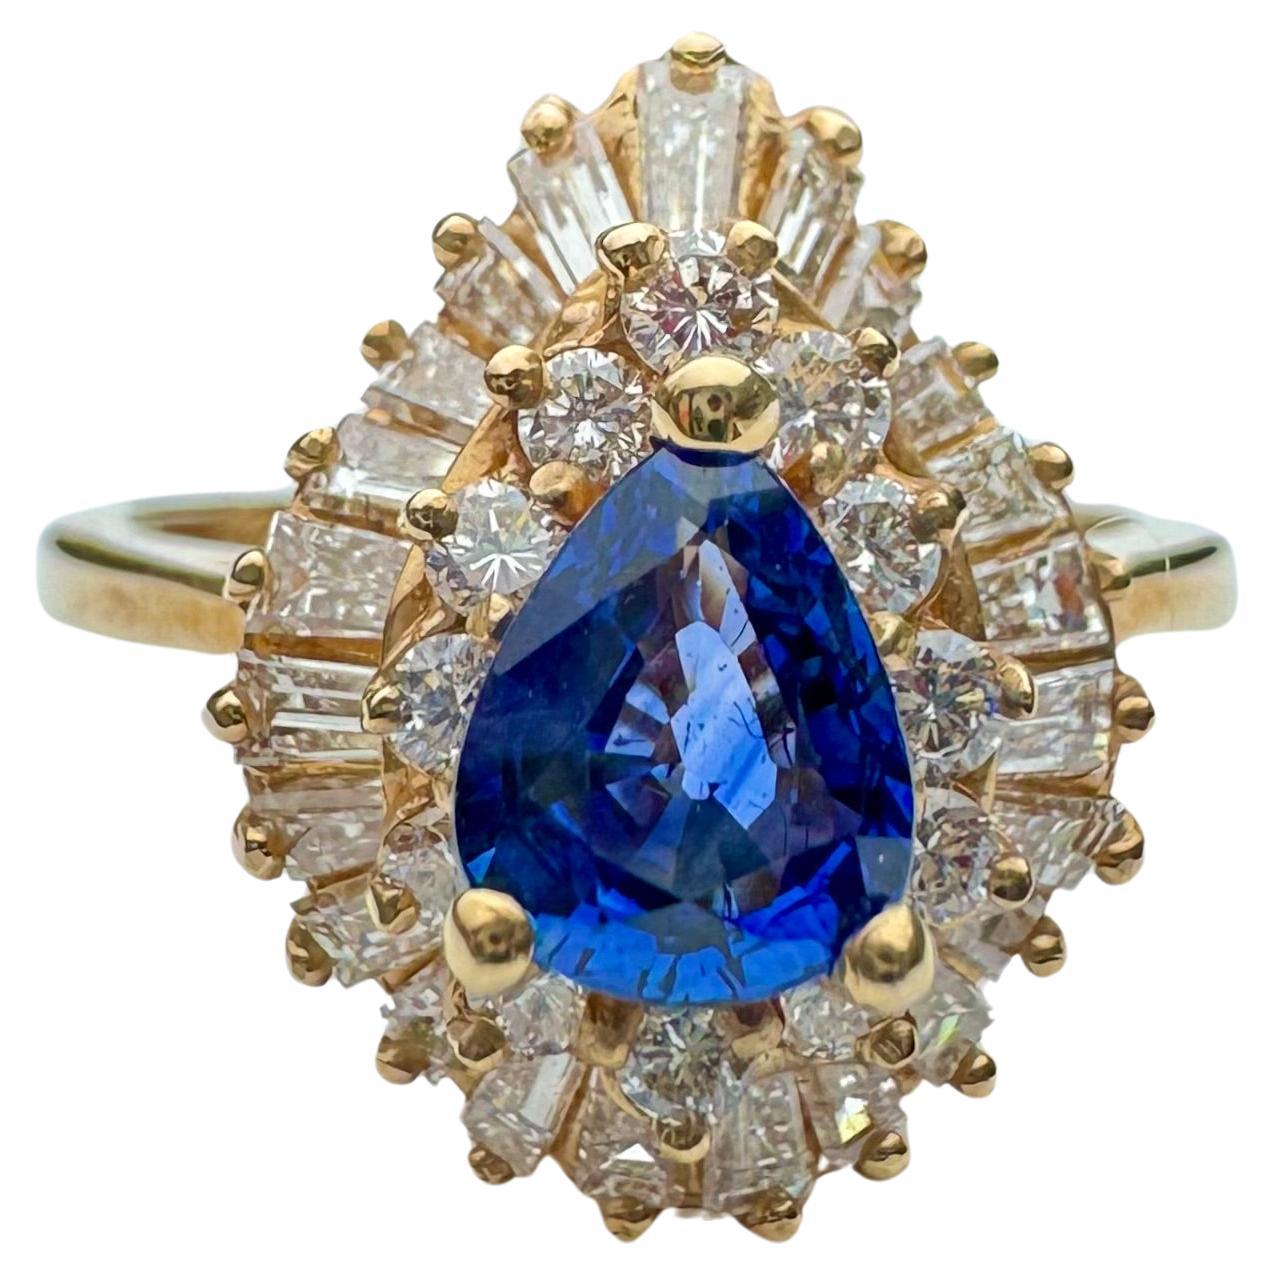 Pear shaped Sapphire and Diamond Ring in 14k yellow gold